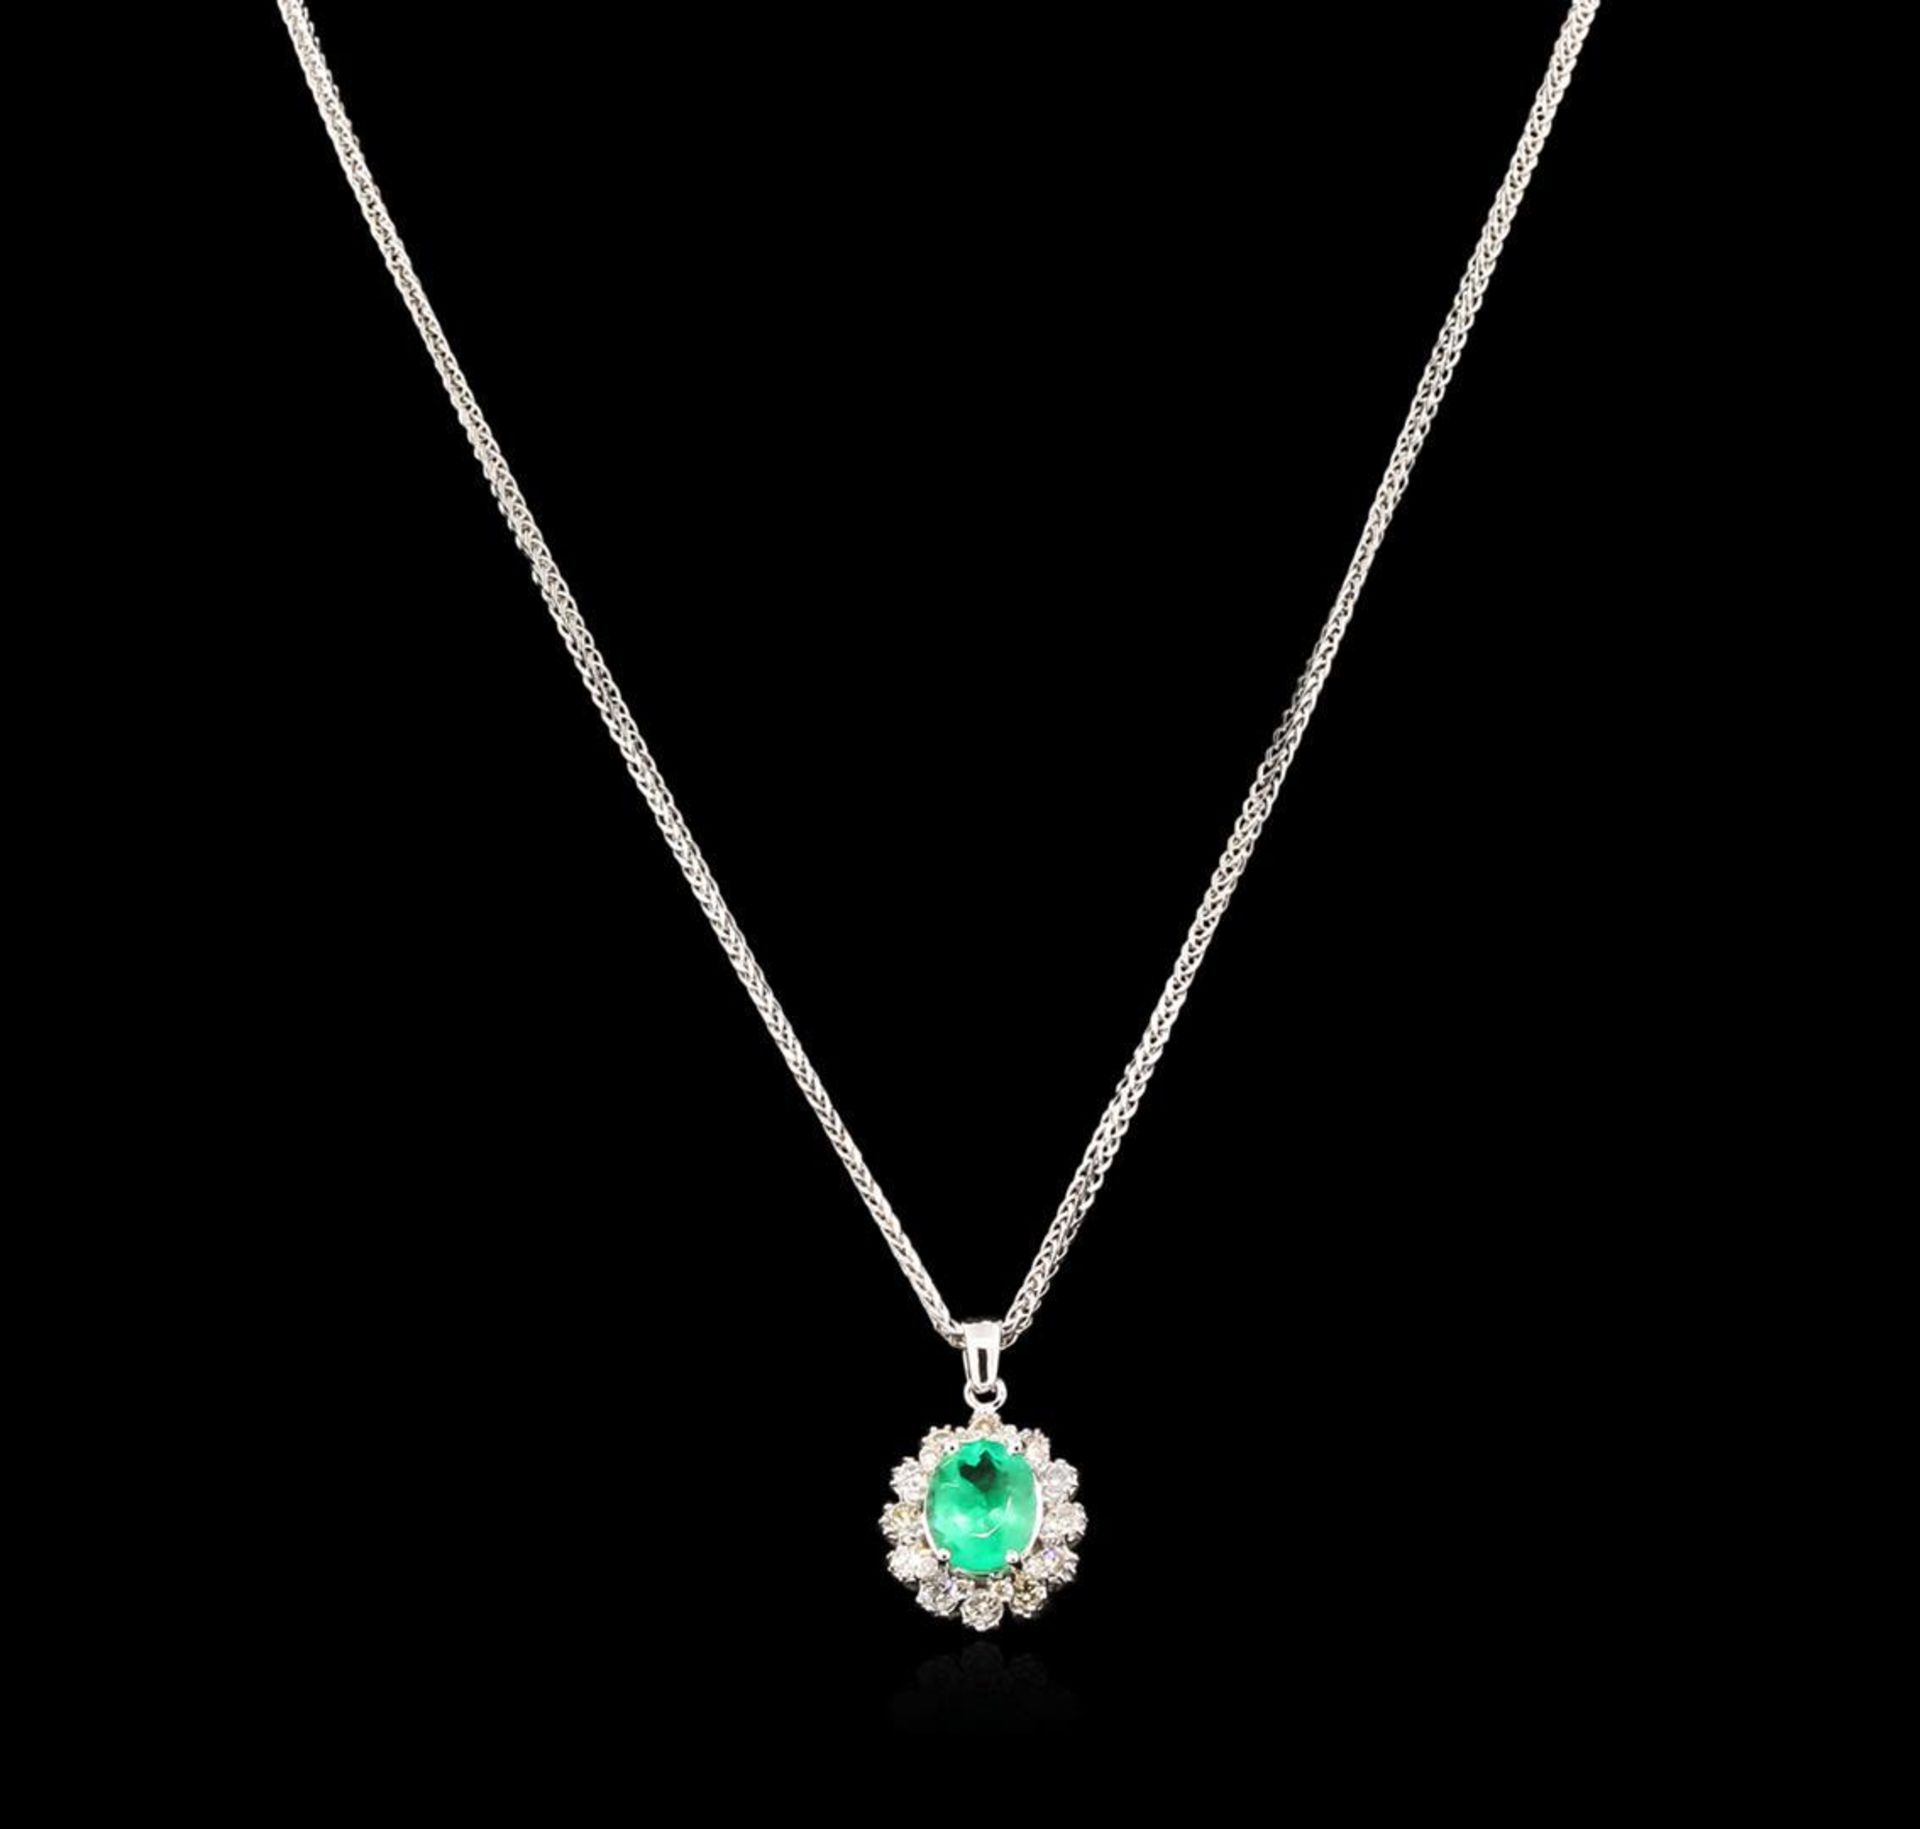 2.52 ctw Emerald and Diamond Pendant With Chain - 14KT White Gold - Image 2 of 3